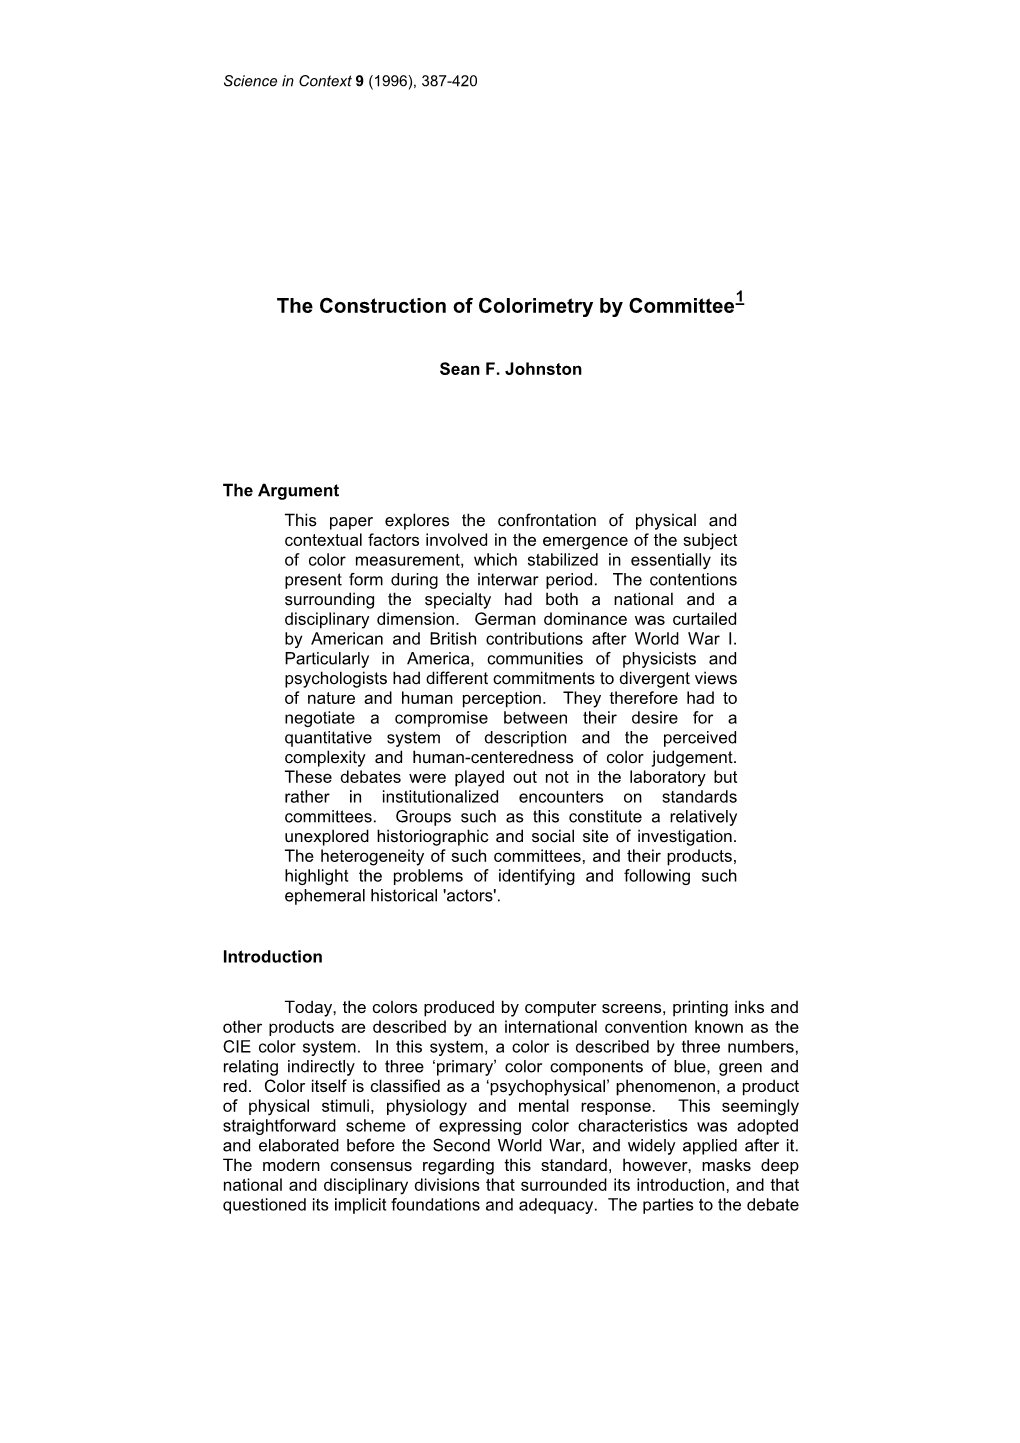 The Construction of Colorimetry by Committee1